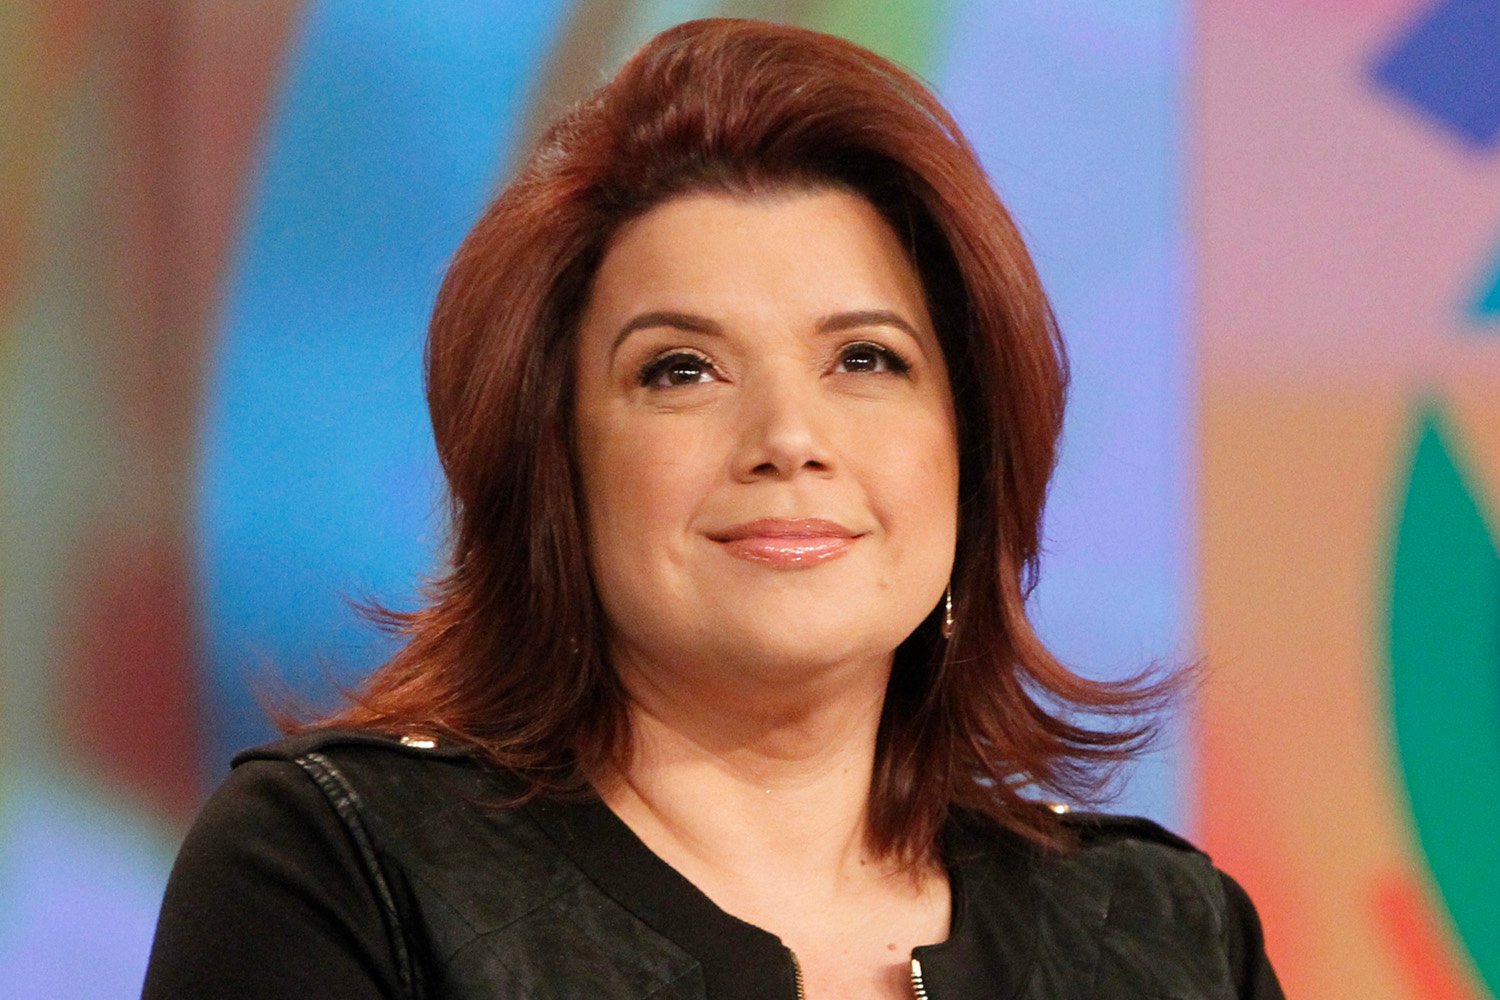 Ana Navarro smiling on the set of 'The View'